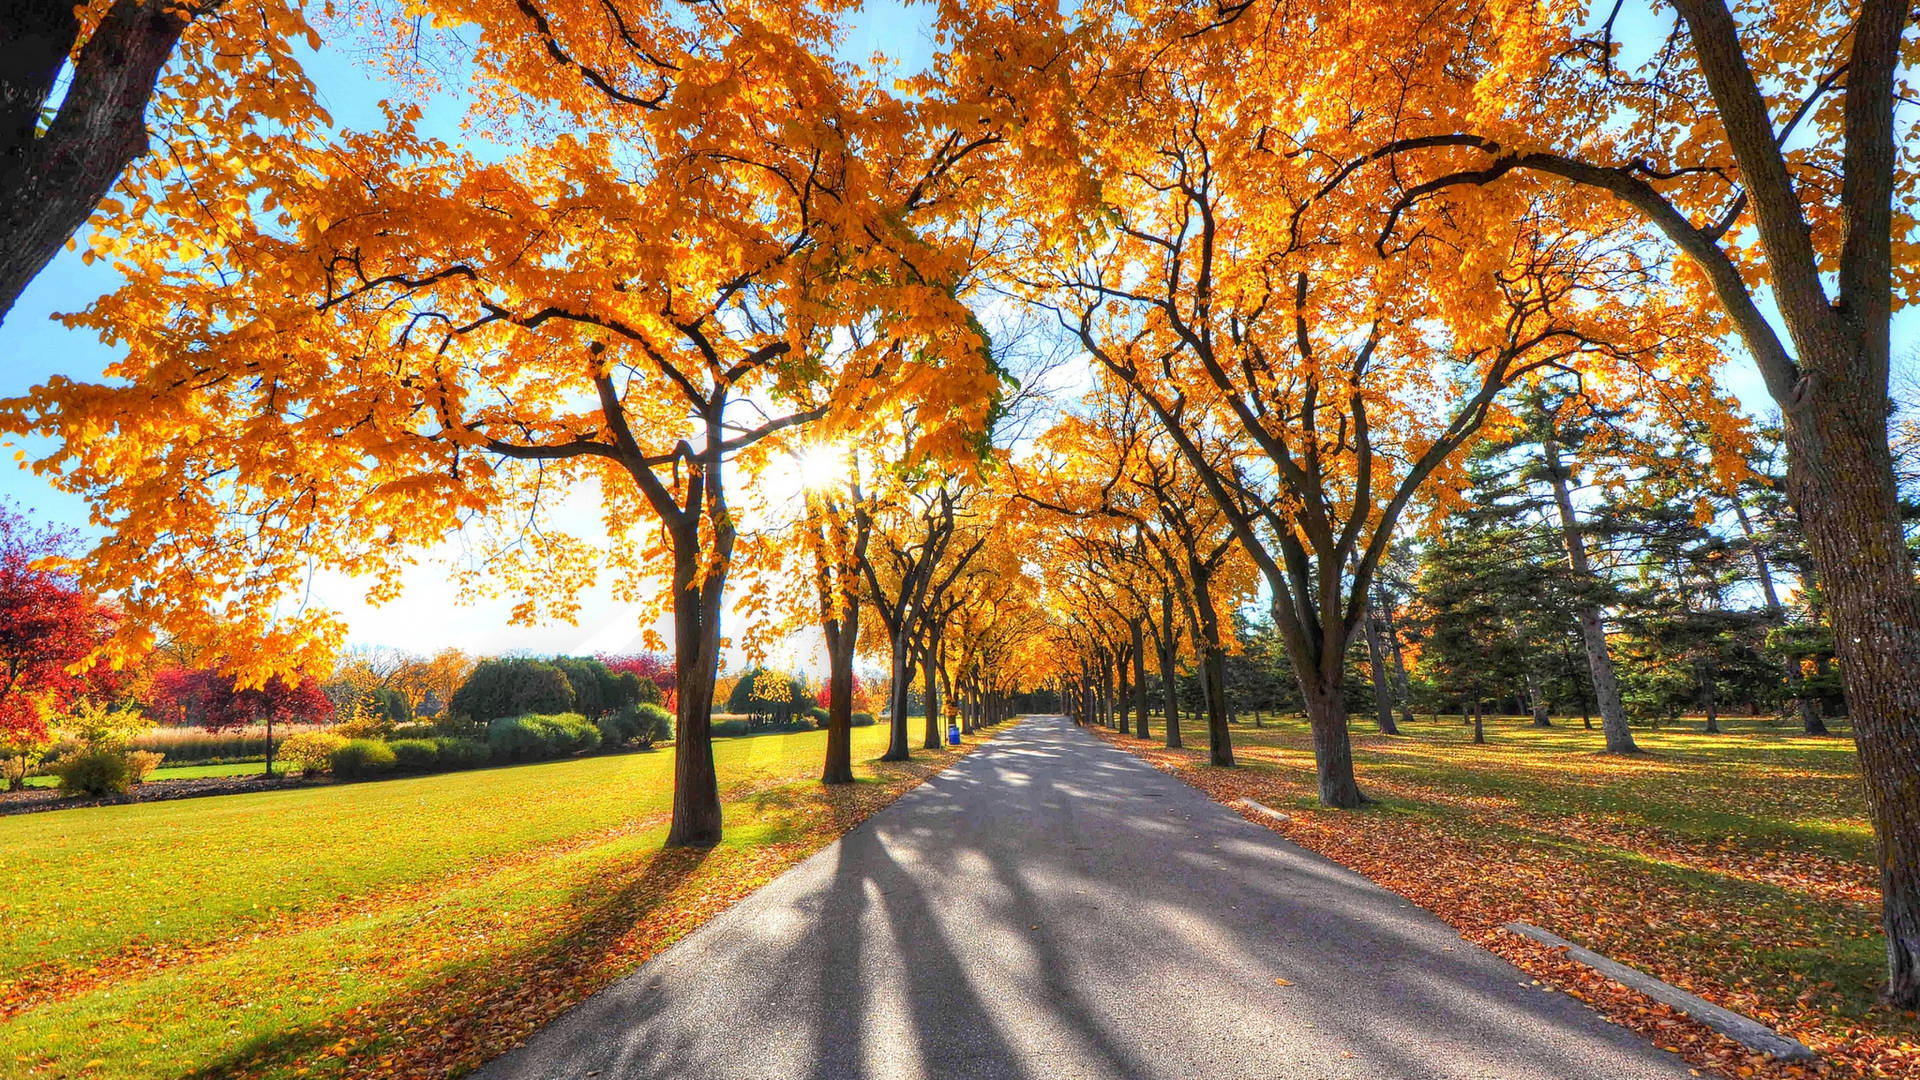 2560x1440 Fall Park With Maple Trees Background